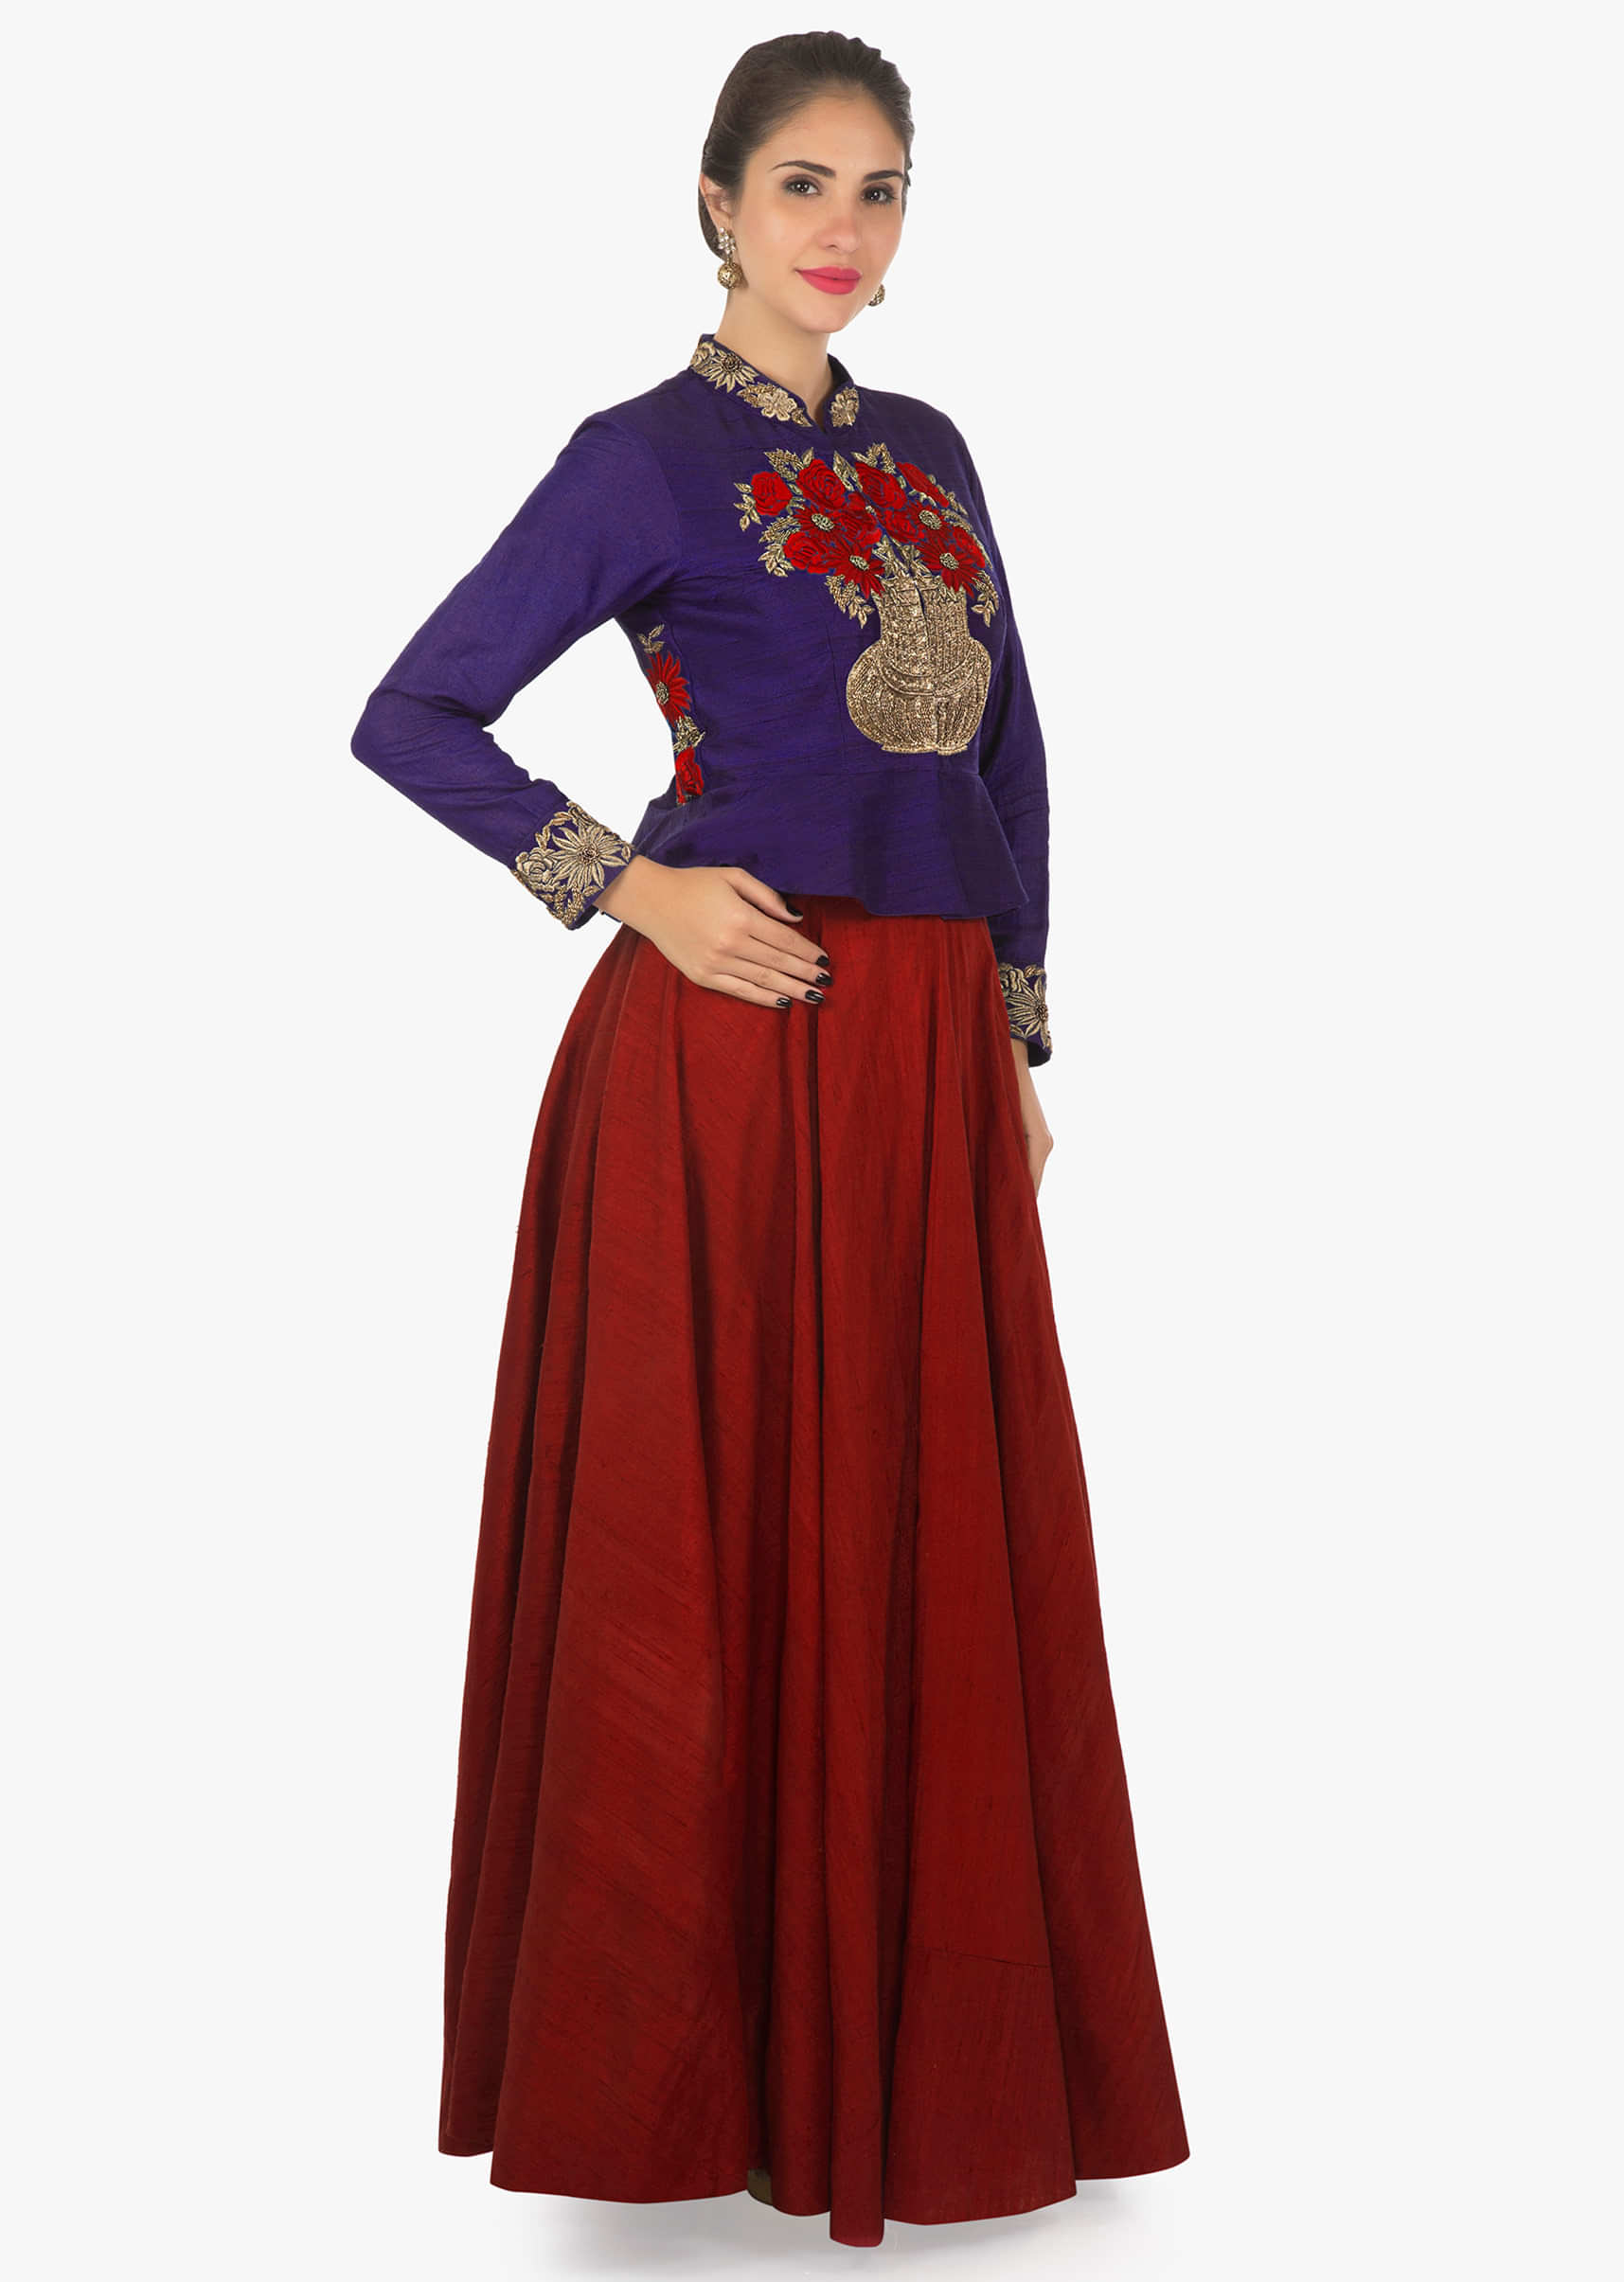 Red Skirt In Raw Silk And Persian Blue Full Sleeves Jacket With Resham And Zardosi Work Online - Kalki Fashion